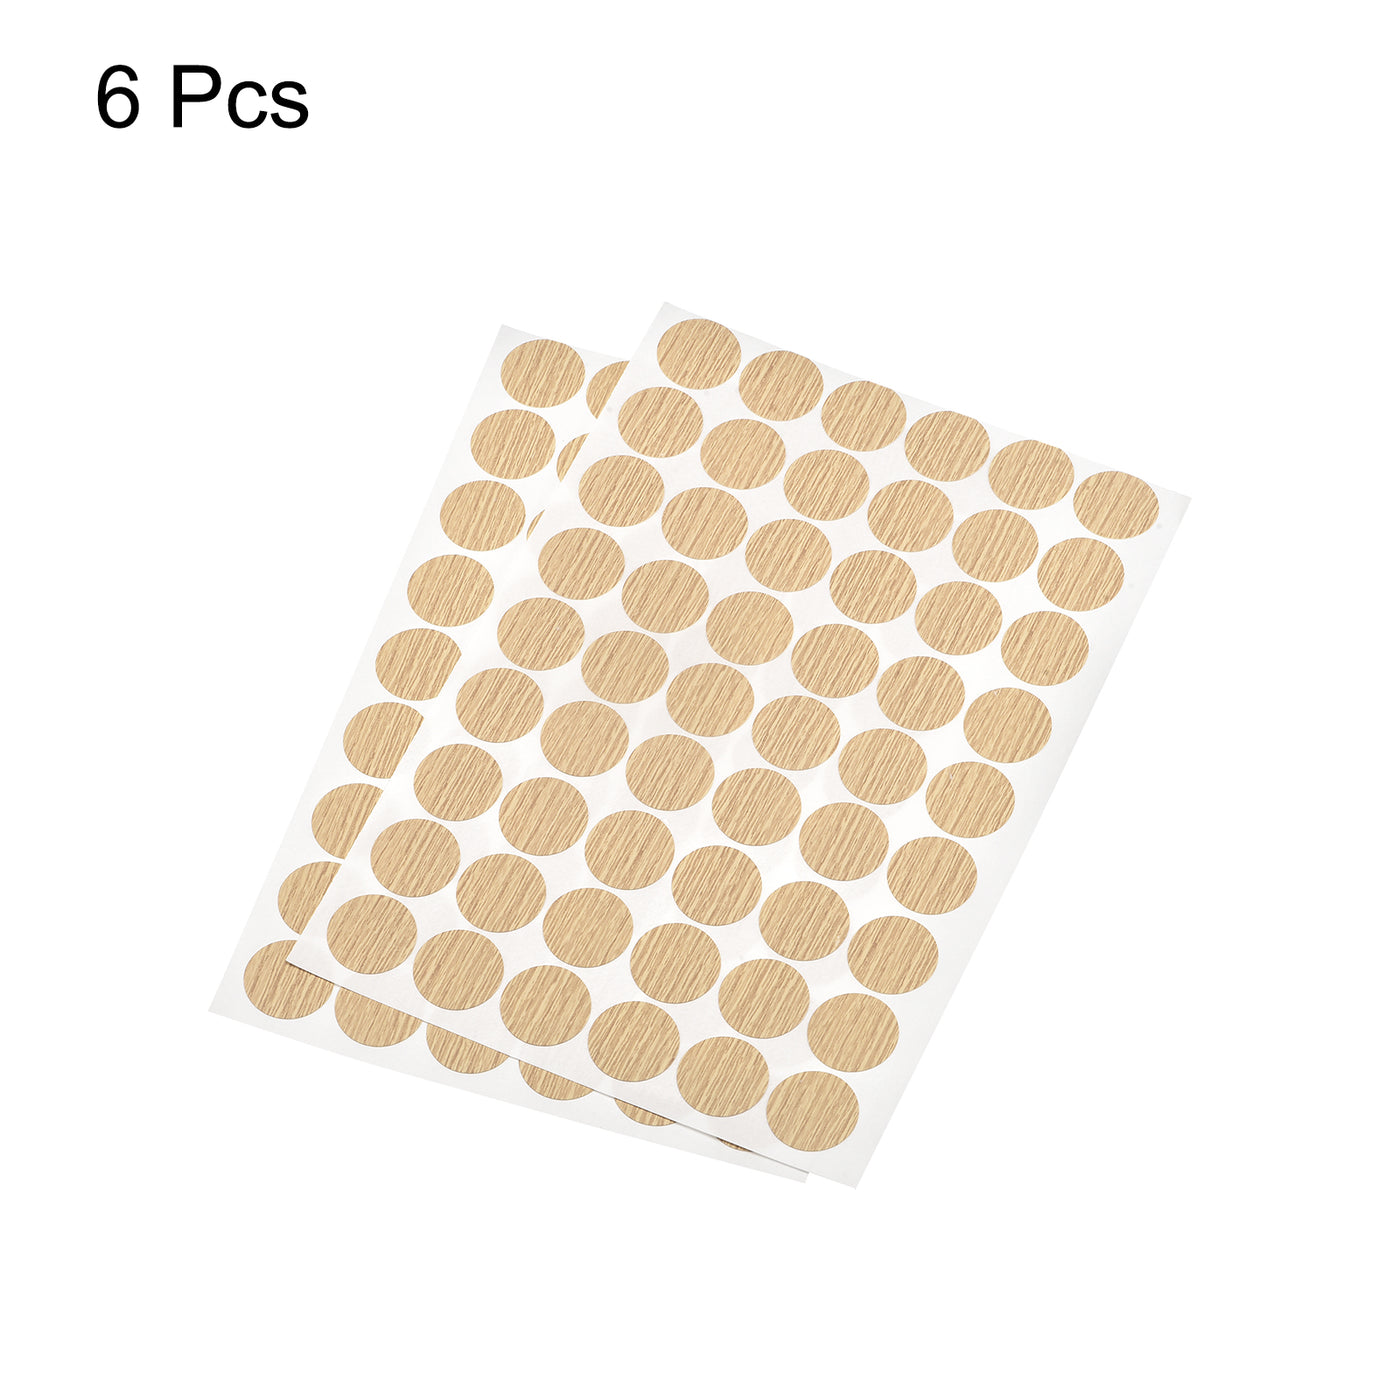 uxcell Uxcell Screw Hole Cover Stickers, 21mm Dia PVC Self Adhesive Covers Caps for Wood Furniture Cabinet Shelf Wardrobe, Oak 6 Sheet/324pcs